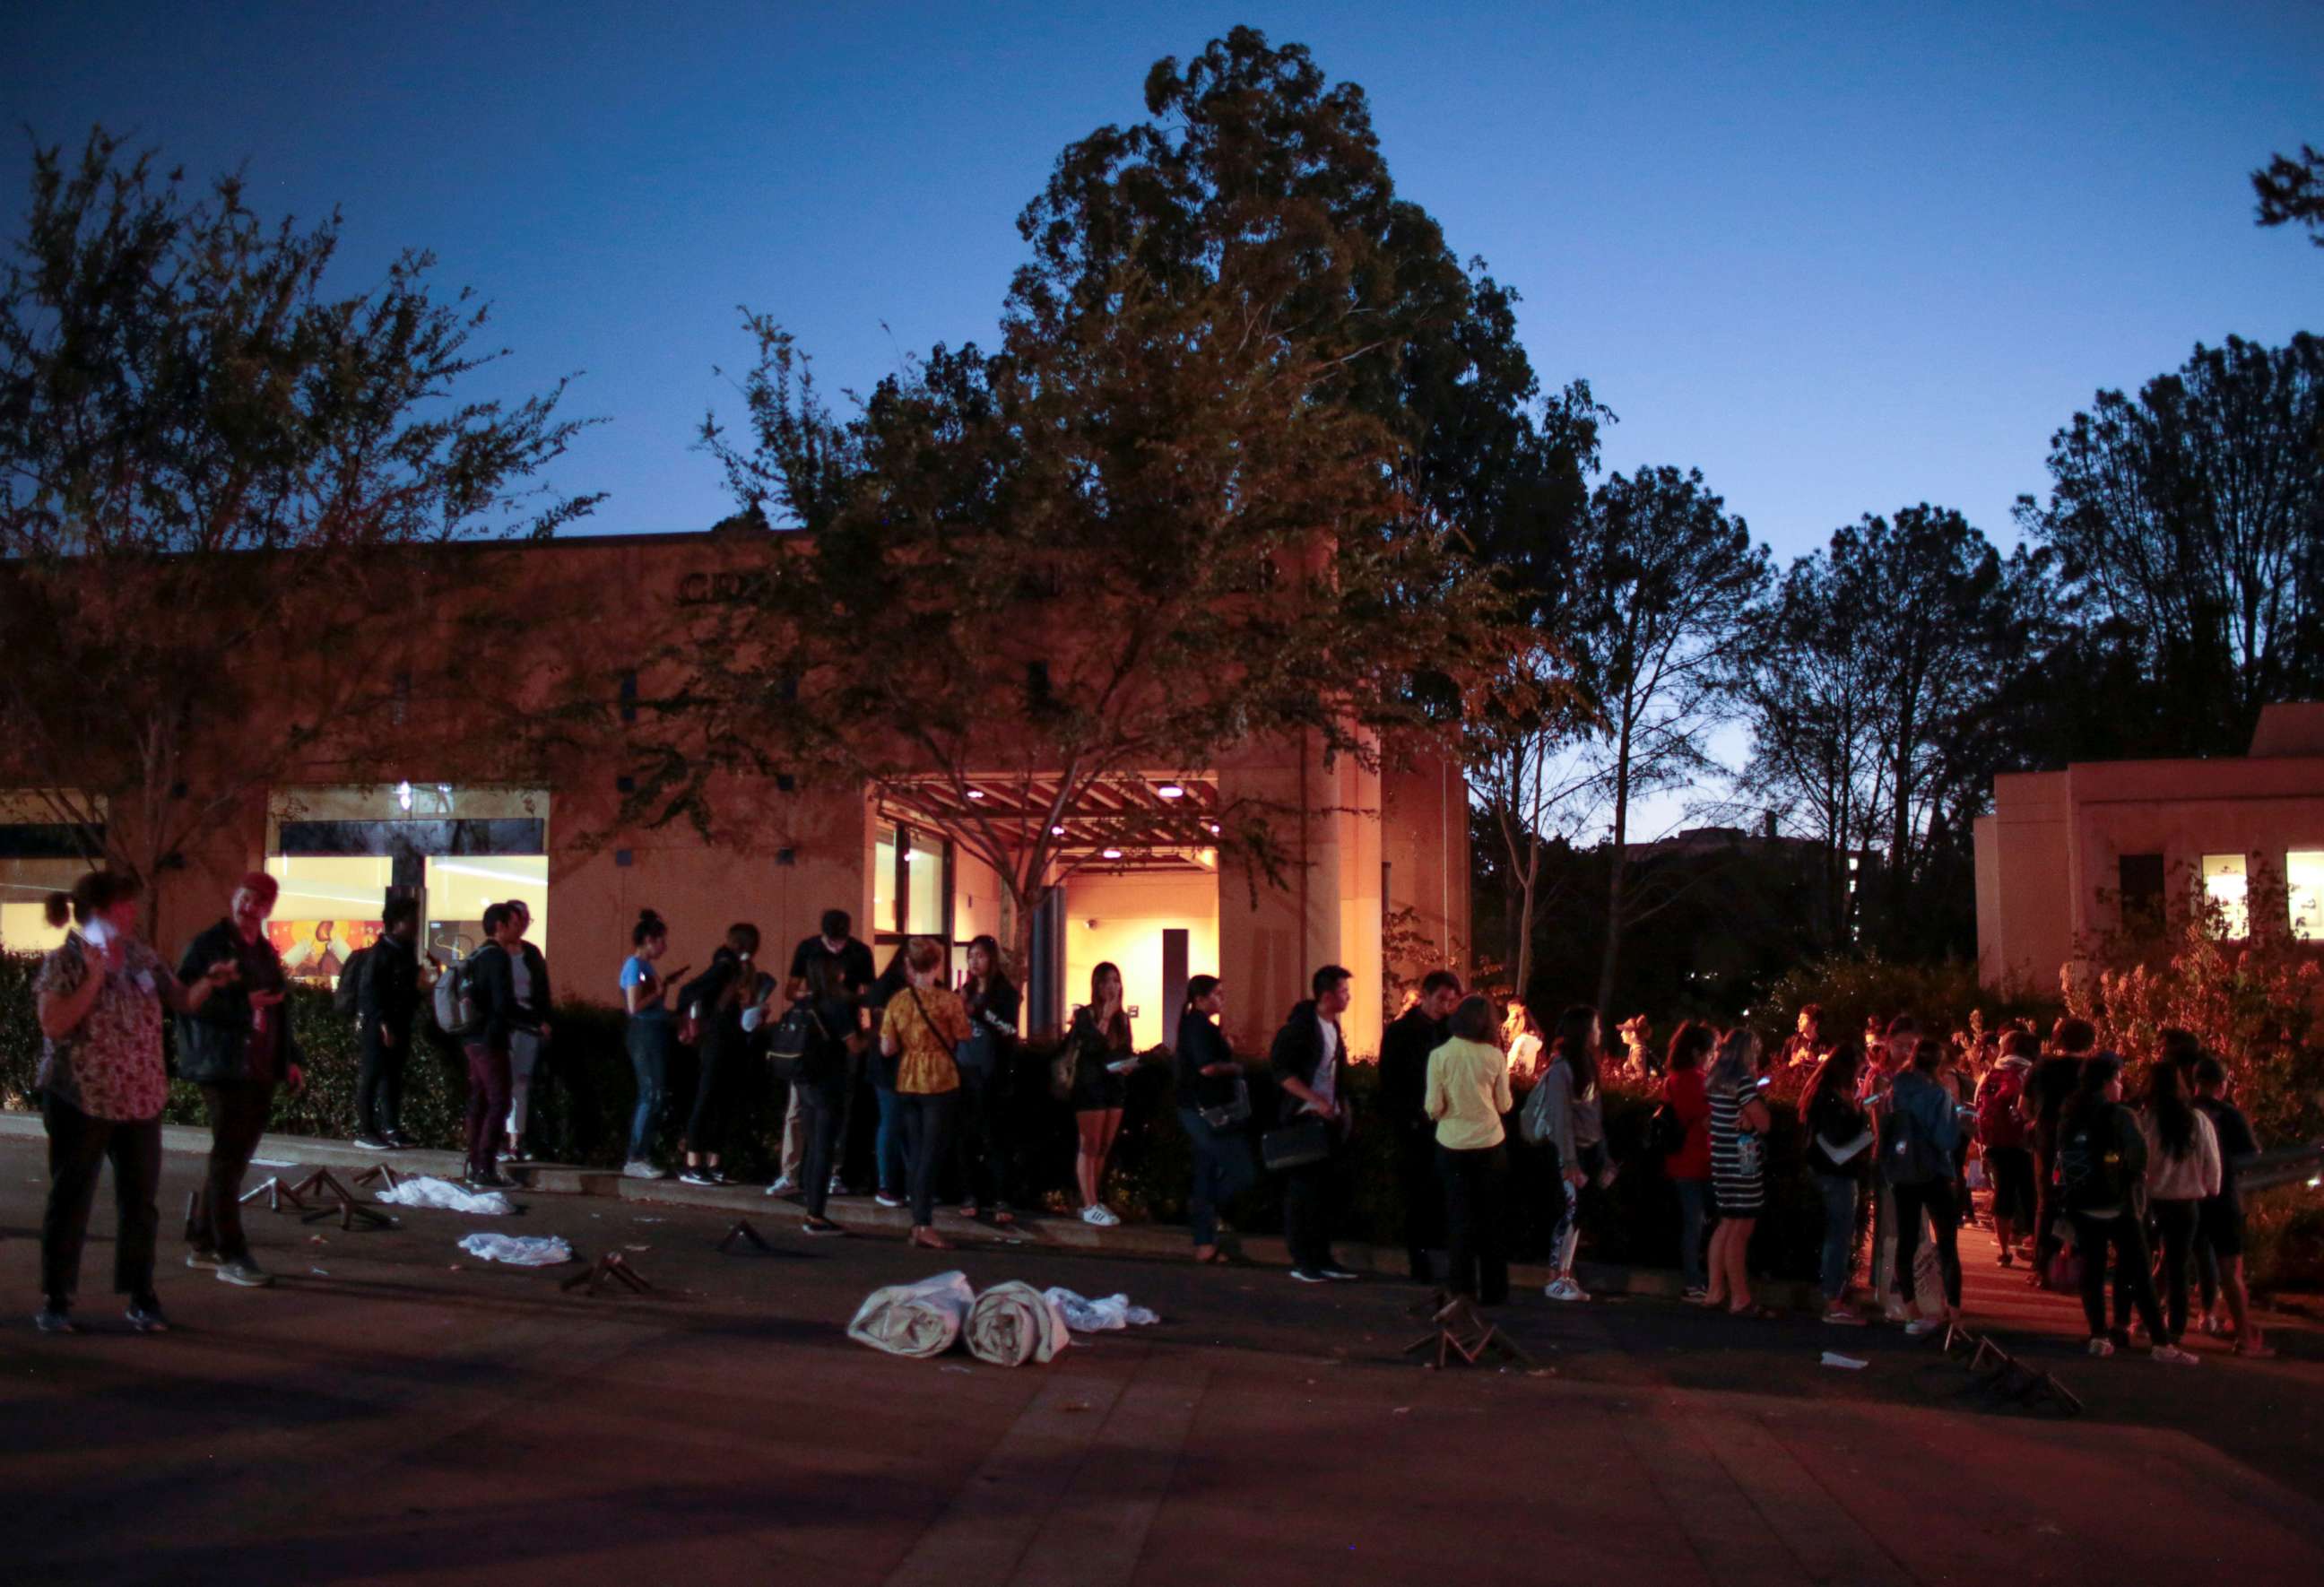 PHOTO: Voters wait to cast their midterm election ballots at the Cross Cultural Center in Irvine, Calif., Nov. 6, 2018.